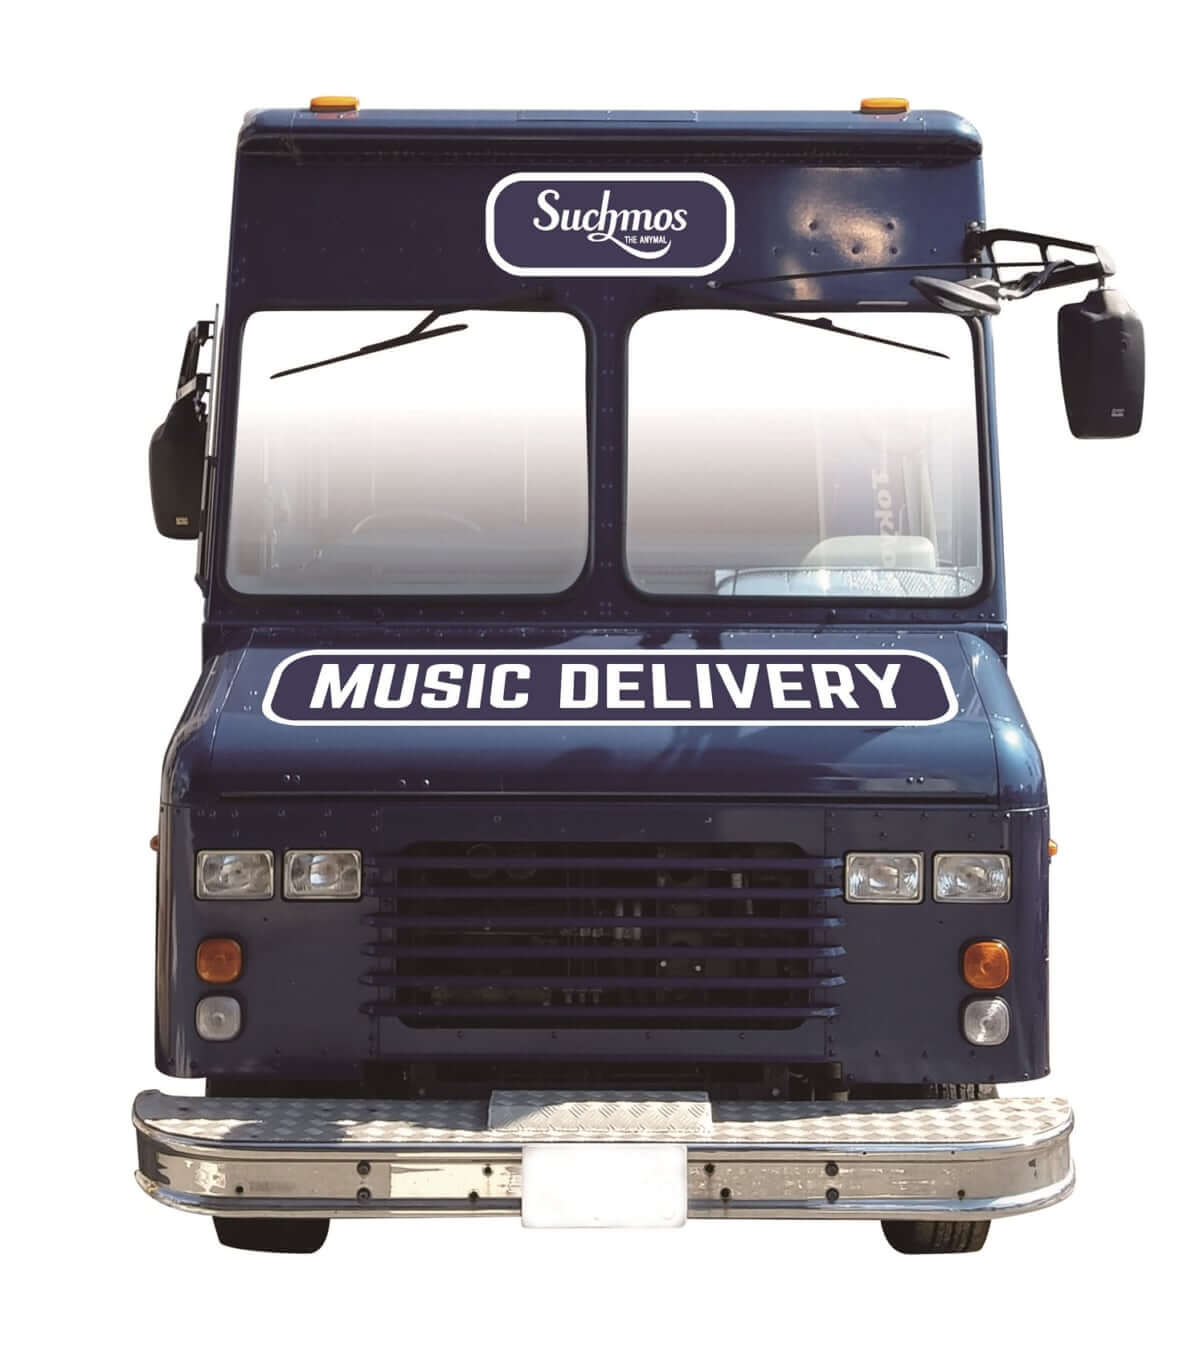 MUSIC DELIVERY